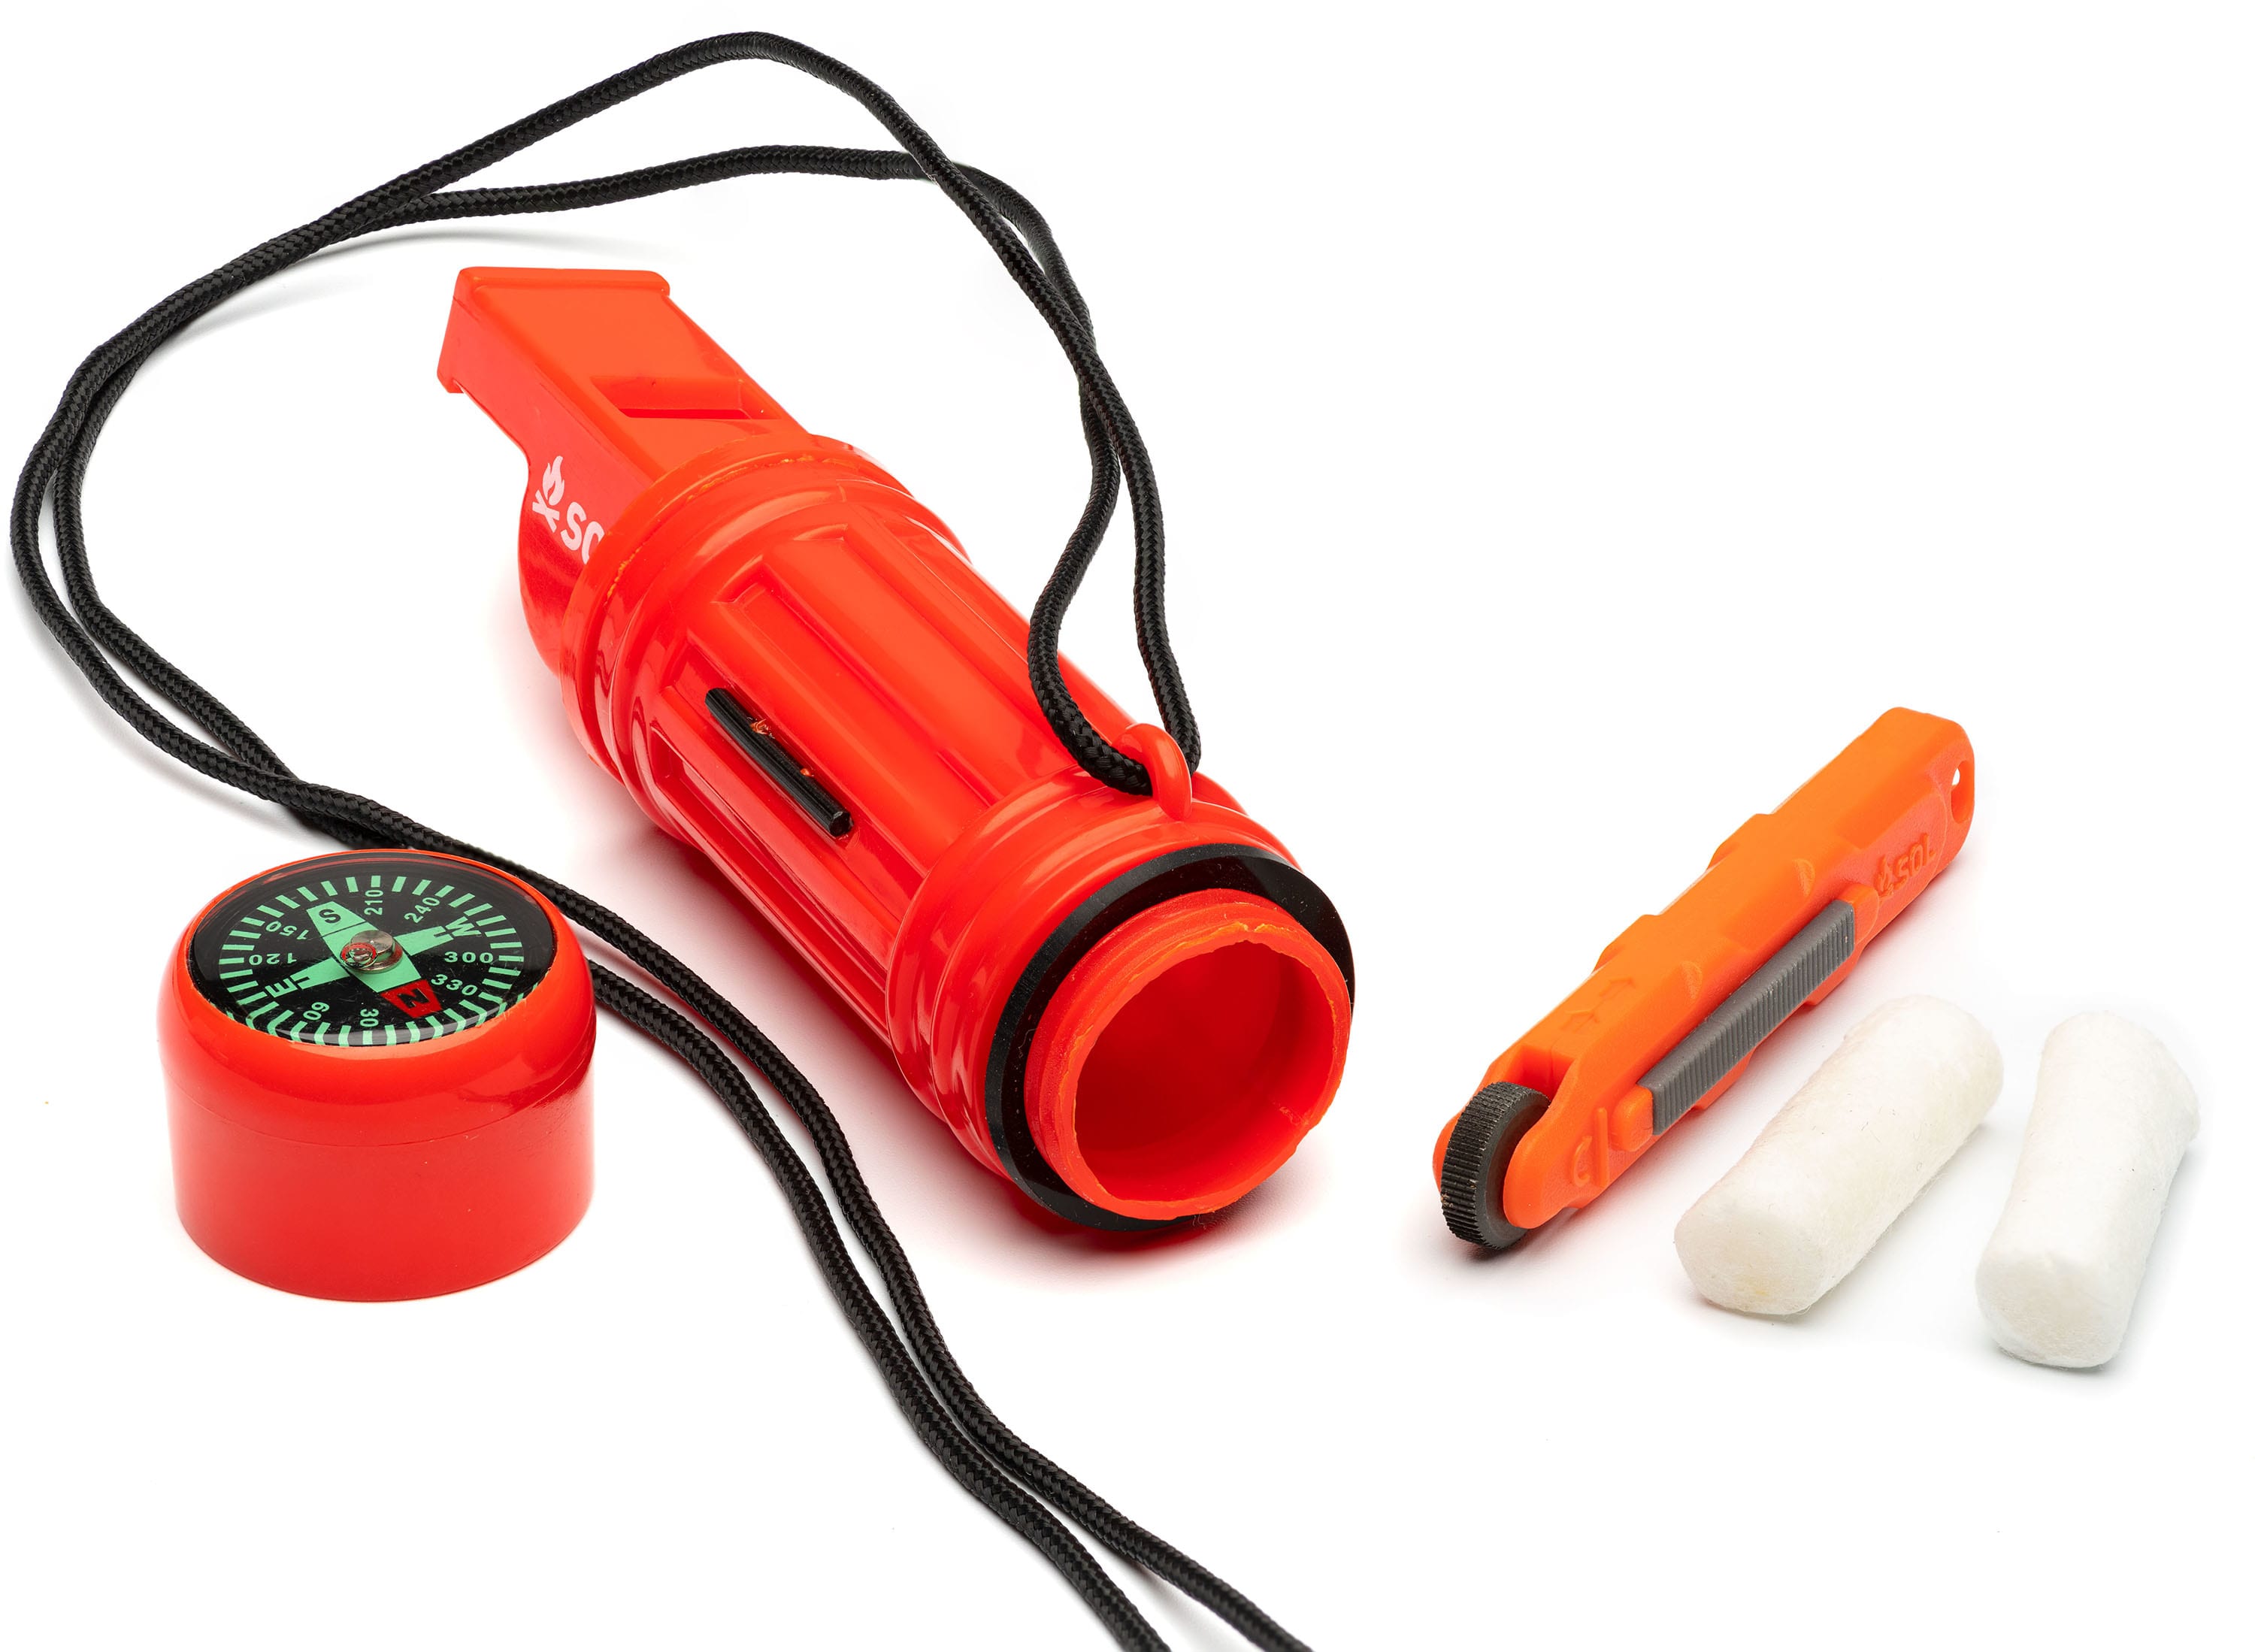 S.O.L.® Fire Lite 8-in-1 Survival Tool